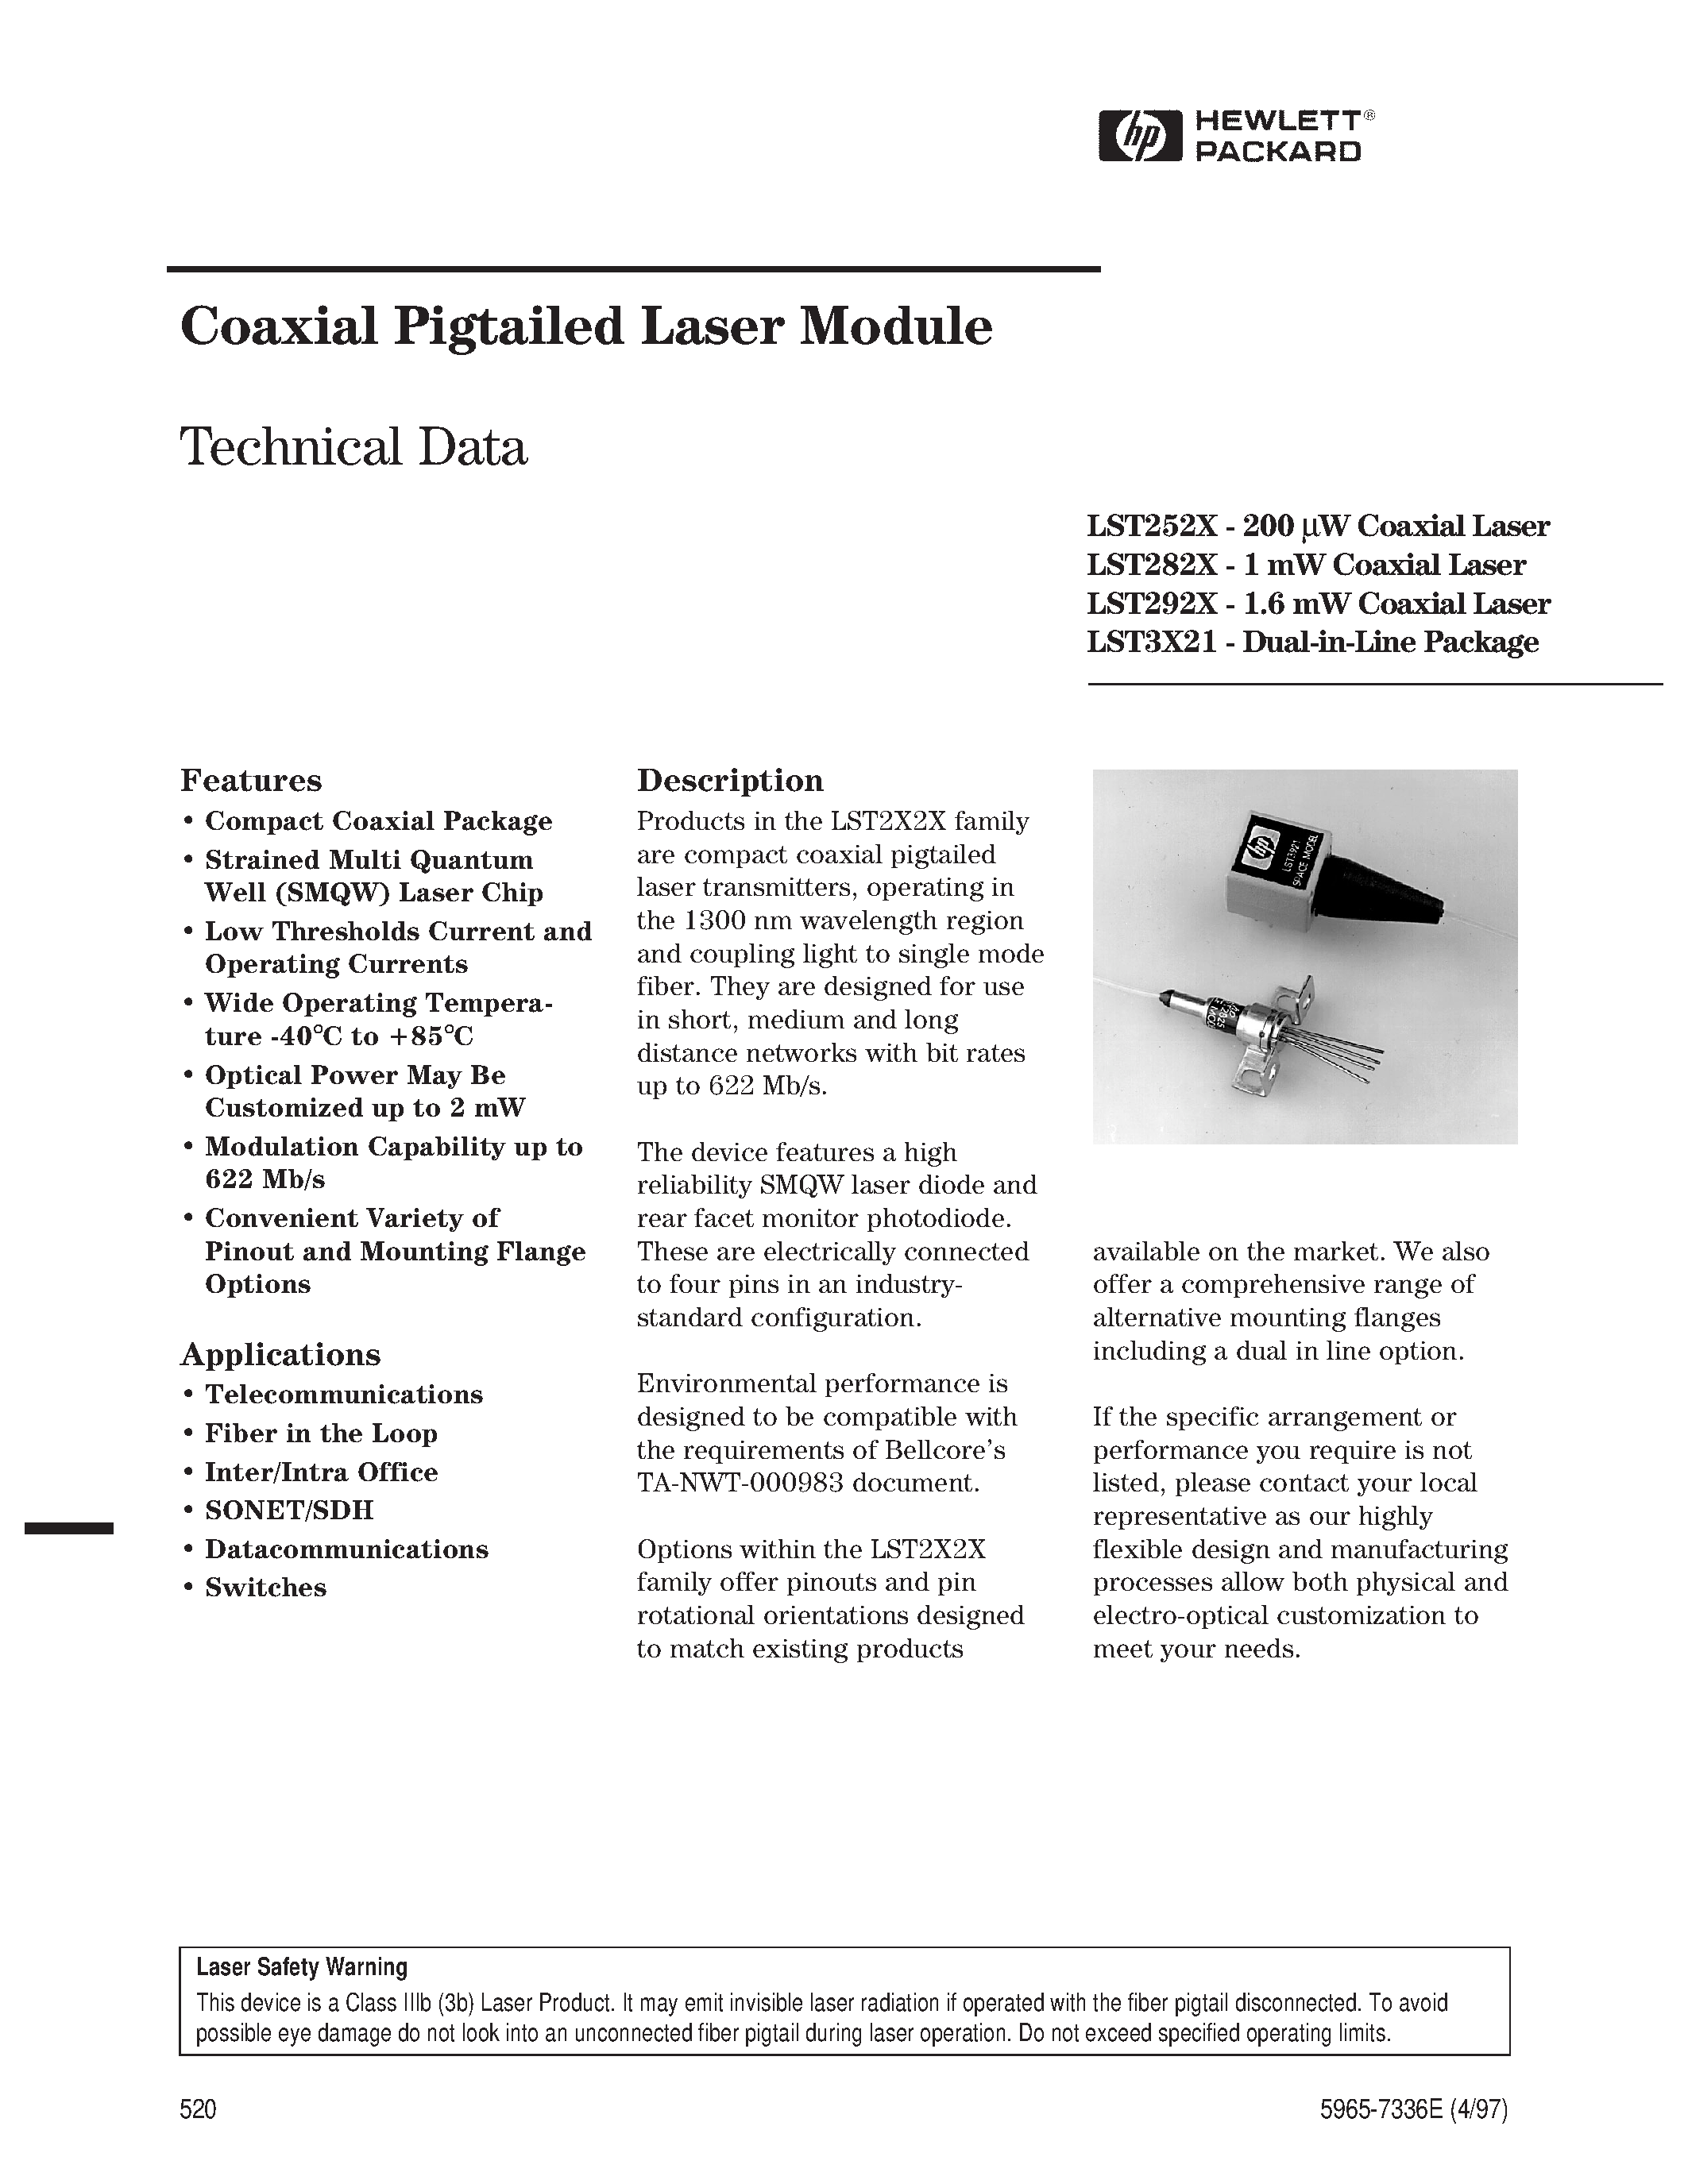 Даташит LST2925-S4-B-SF - Coaxial Pigtailed Laser Module страница 1